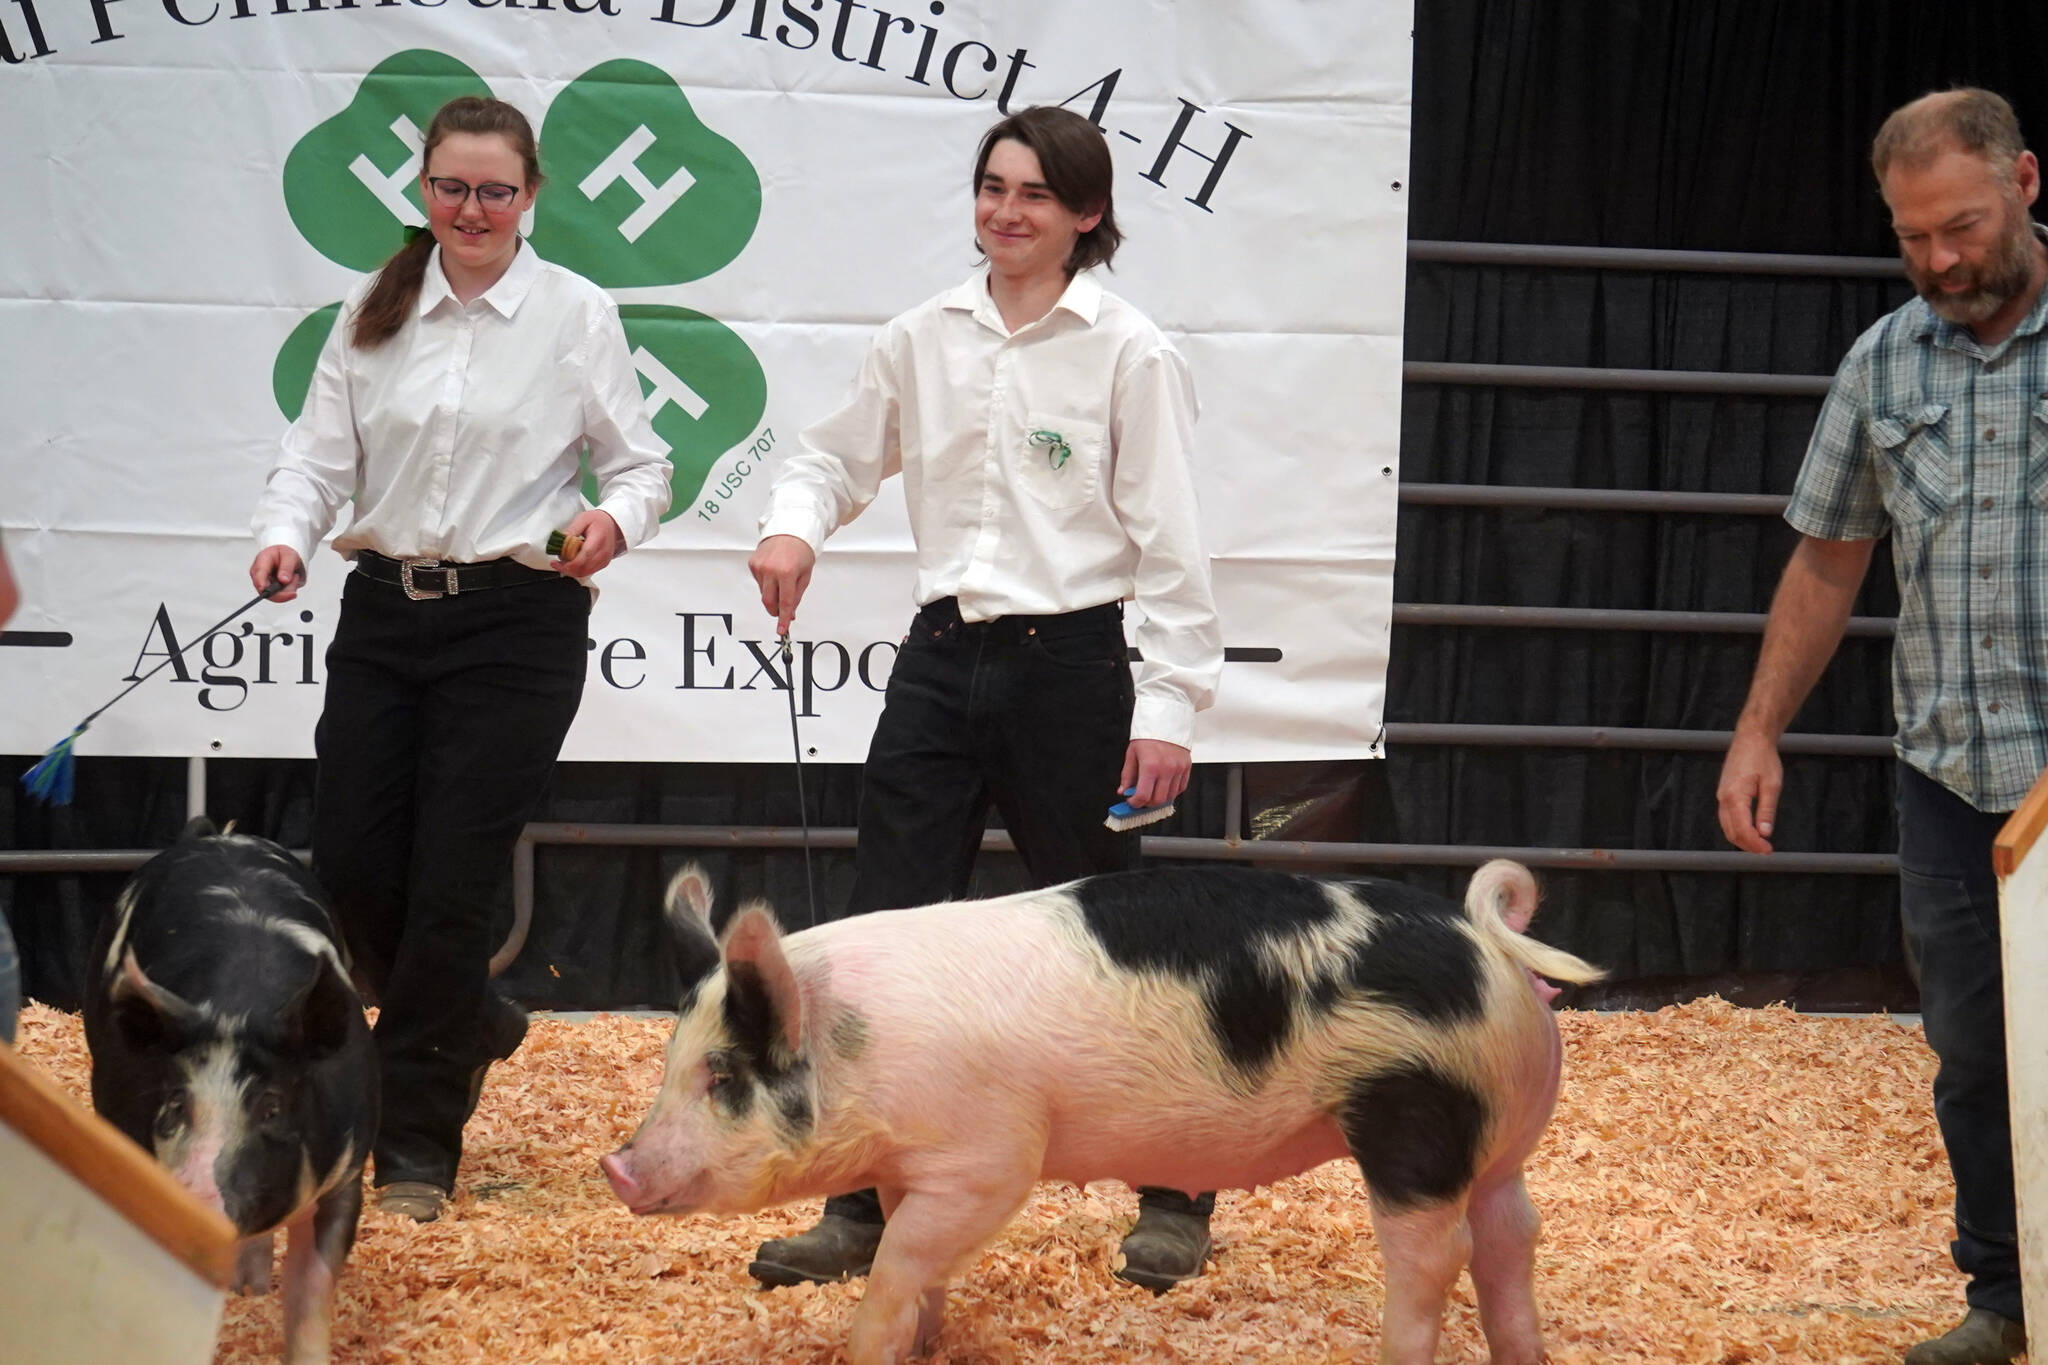 Parker Rose, center, directs his pig Crackers during the pig competition at the Kenai Peninsula District 4-H Agriculture Expo on Friday, Aug. 4, 2023, at the Soldotna Regional Sports Complex in Soldotna, Alaska. (Jake Dye/Peninsula Clarion)